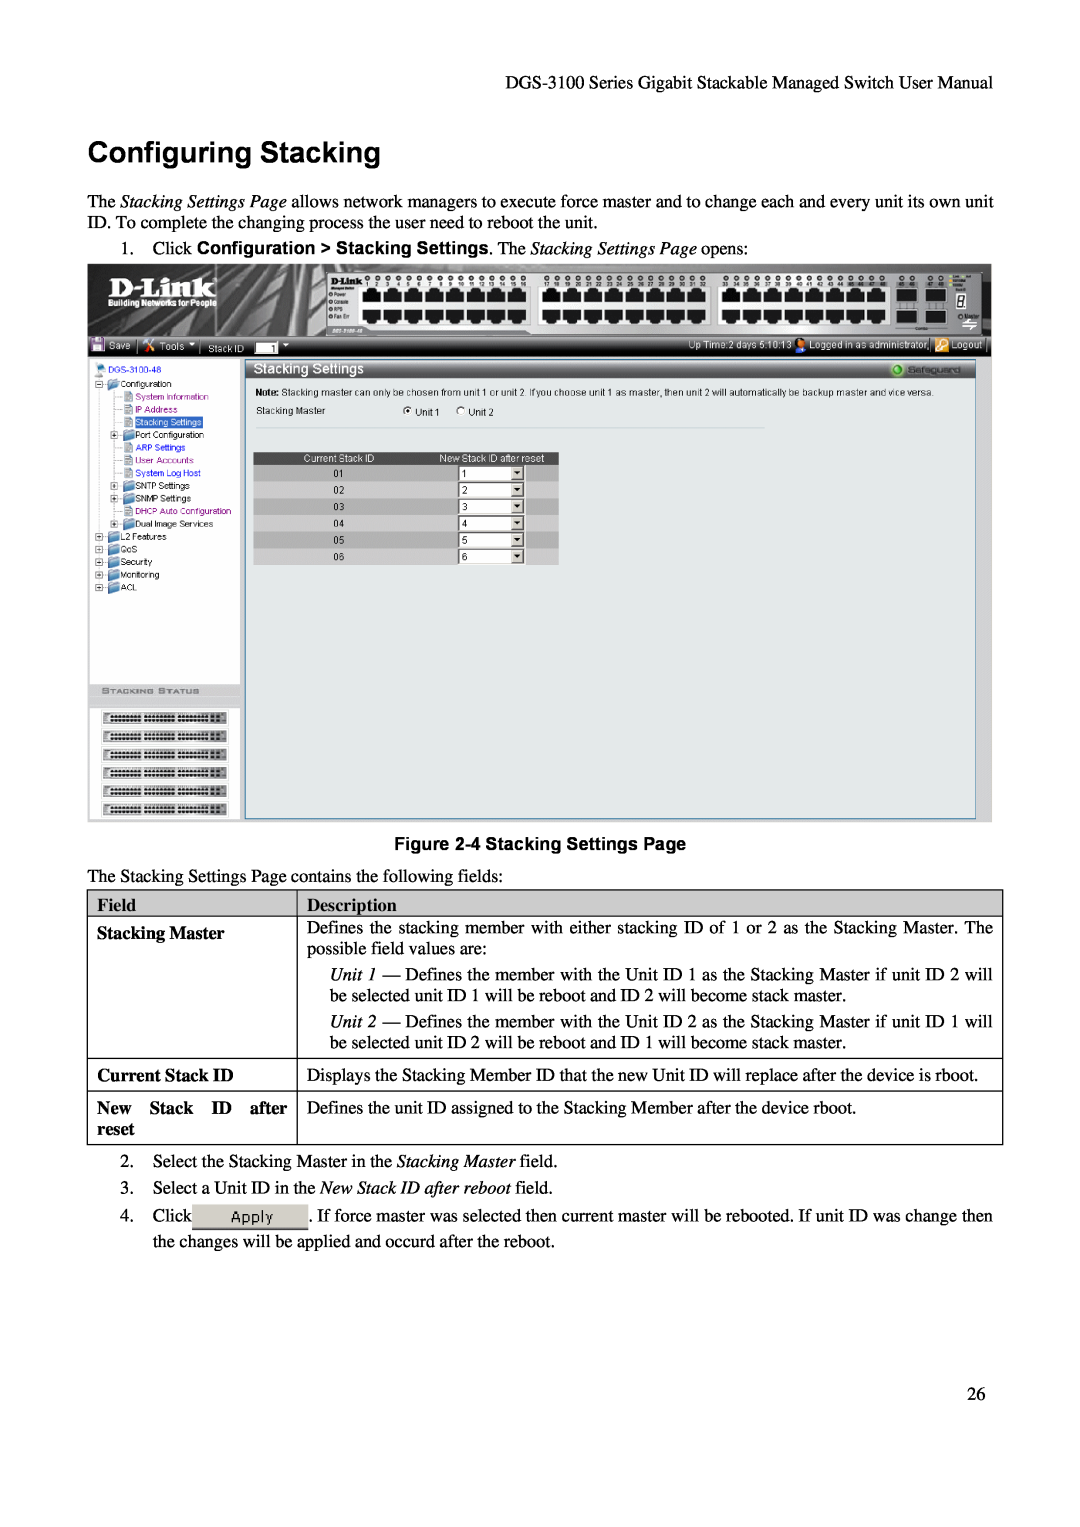 D-Link DGS-3100 user manual Configuring Stacking, 4 Stacking Settings Page, Description 